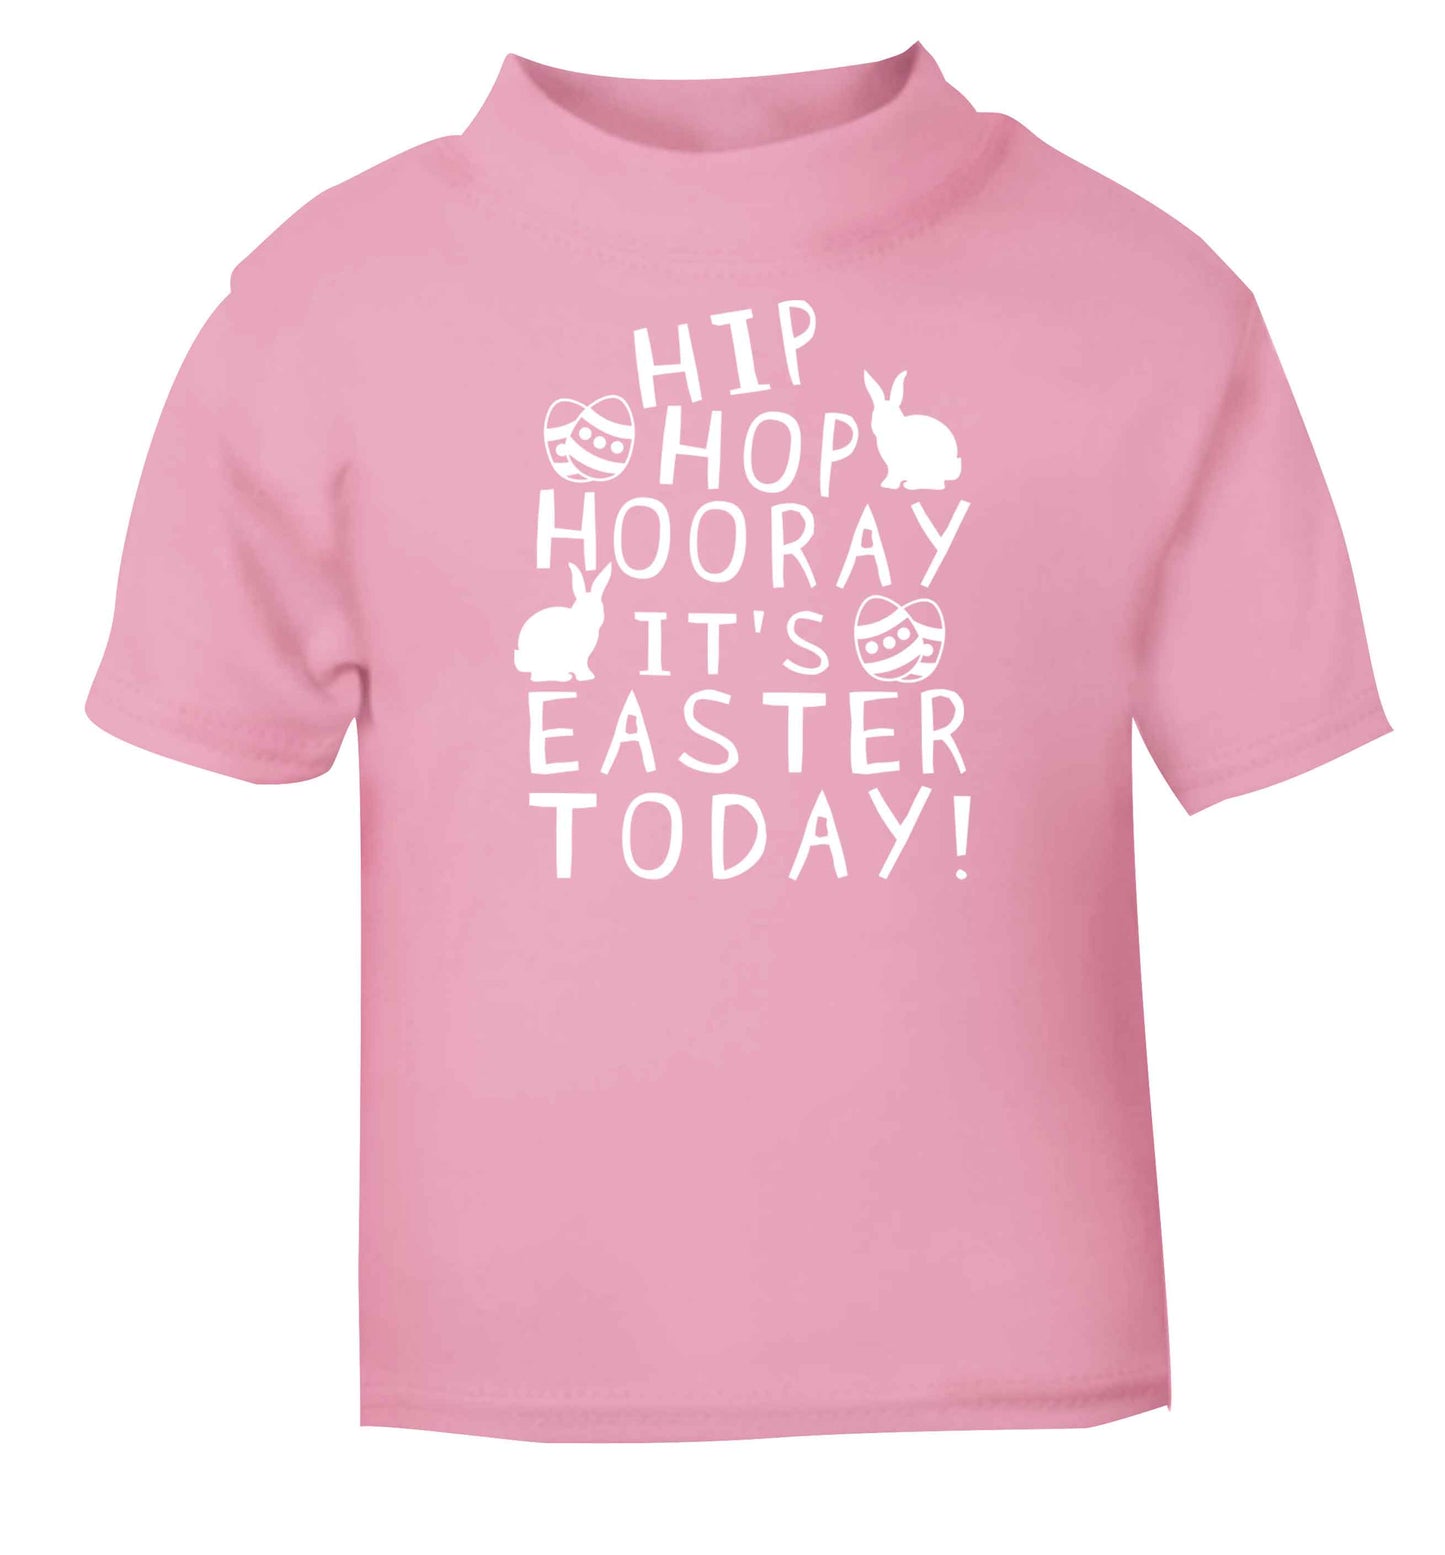 Hip hip hooray it's Easter today! light pink baby toddler Tshirt 2 Years